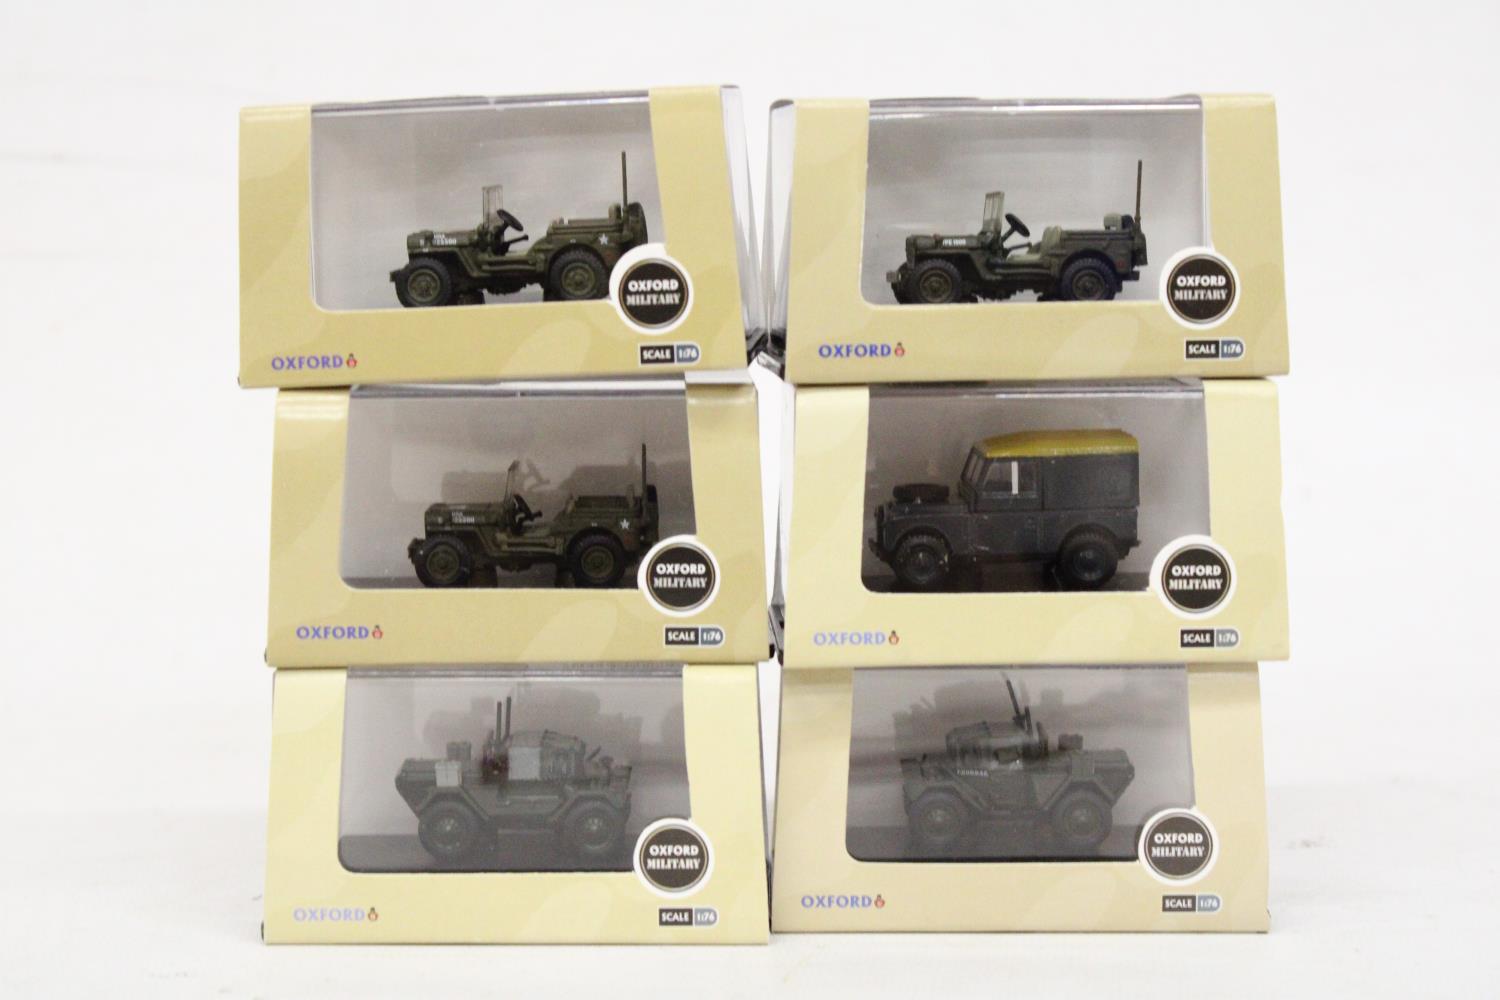 SIX AS NEW AND BOXED OXFORD MILITARY VEHICLES